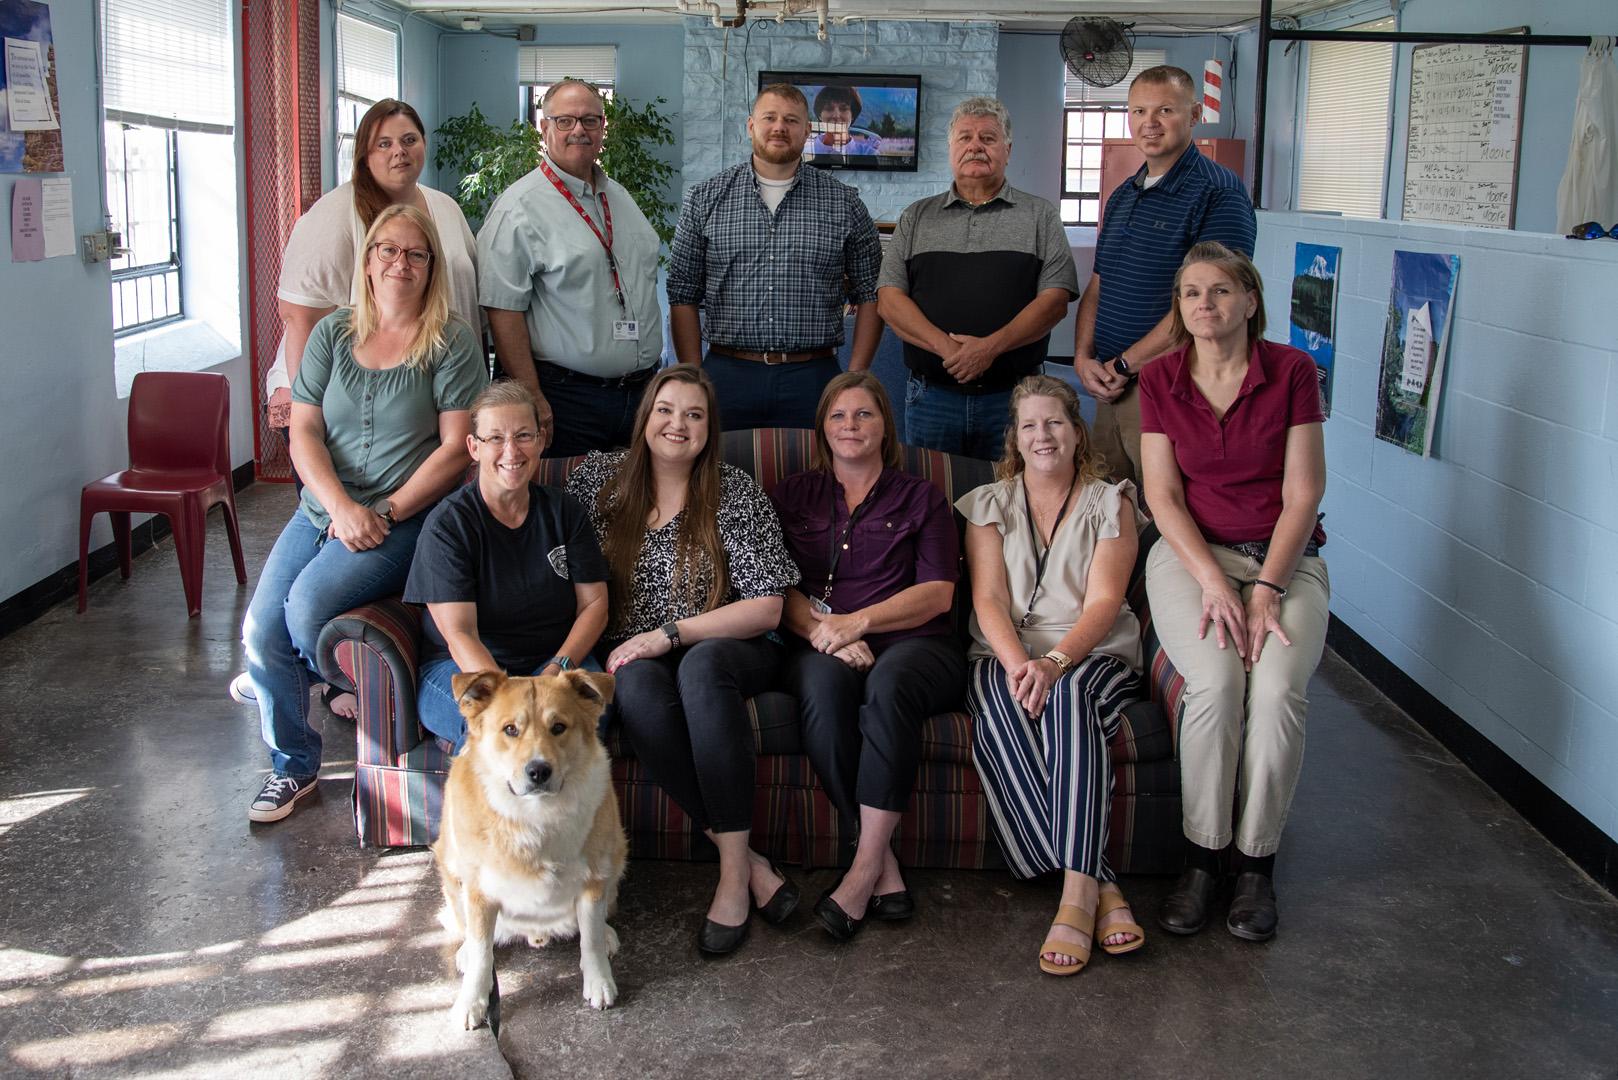 A team of 11 staff members and house dog Honor in the Algoa Correctional Center Honor Dorm.